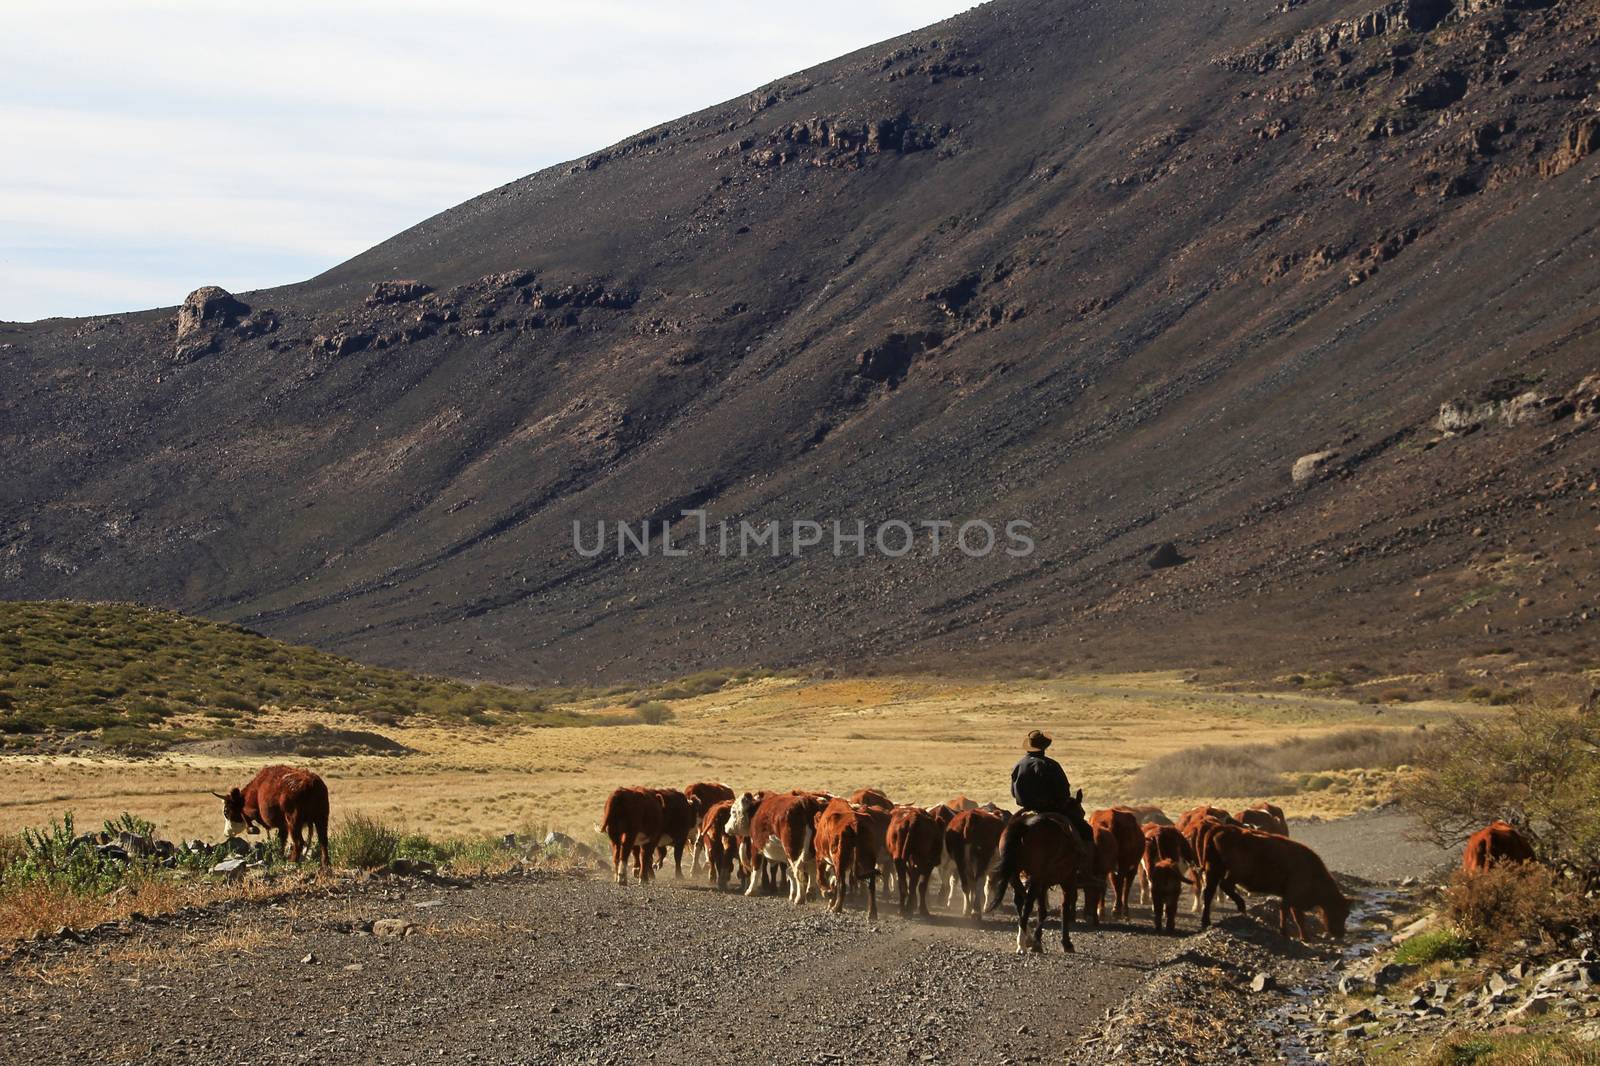 Gauchos and herd of cows in Argentina by cicloco